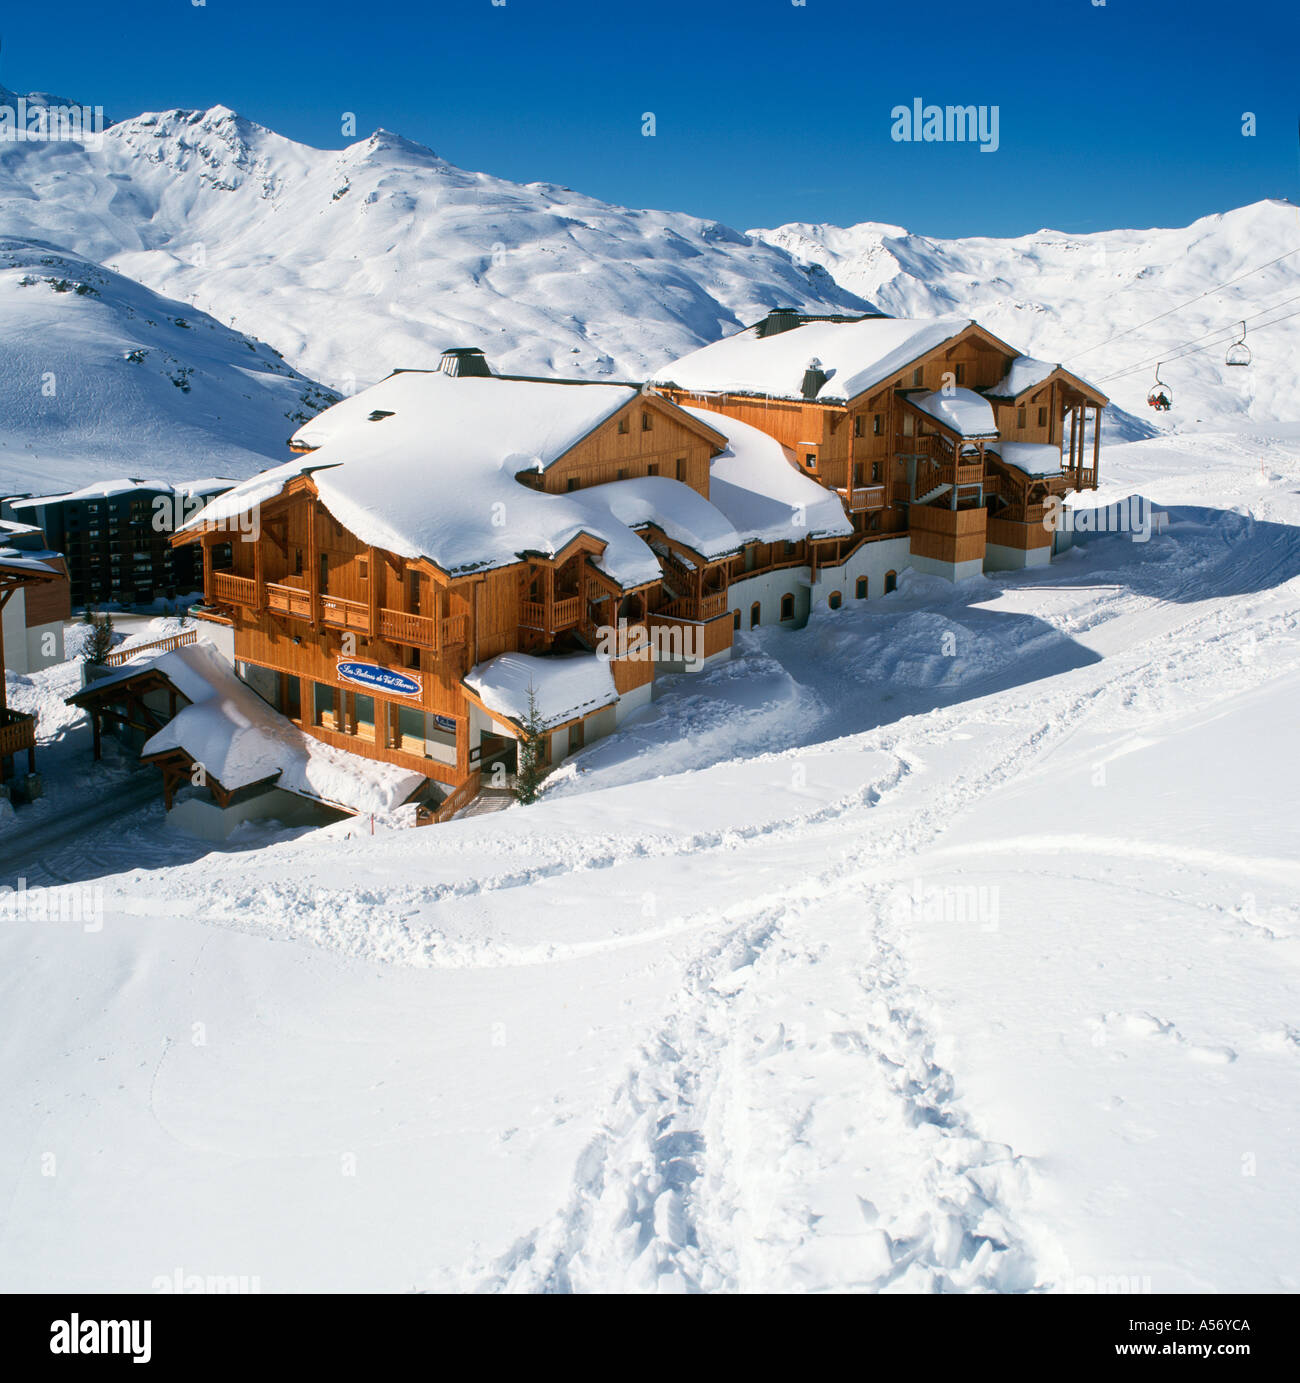 Typical Apartments (Balcons de Val Thorens), Val Thorens, Three Valleys, Savoie, French Alps, France Stock Photo